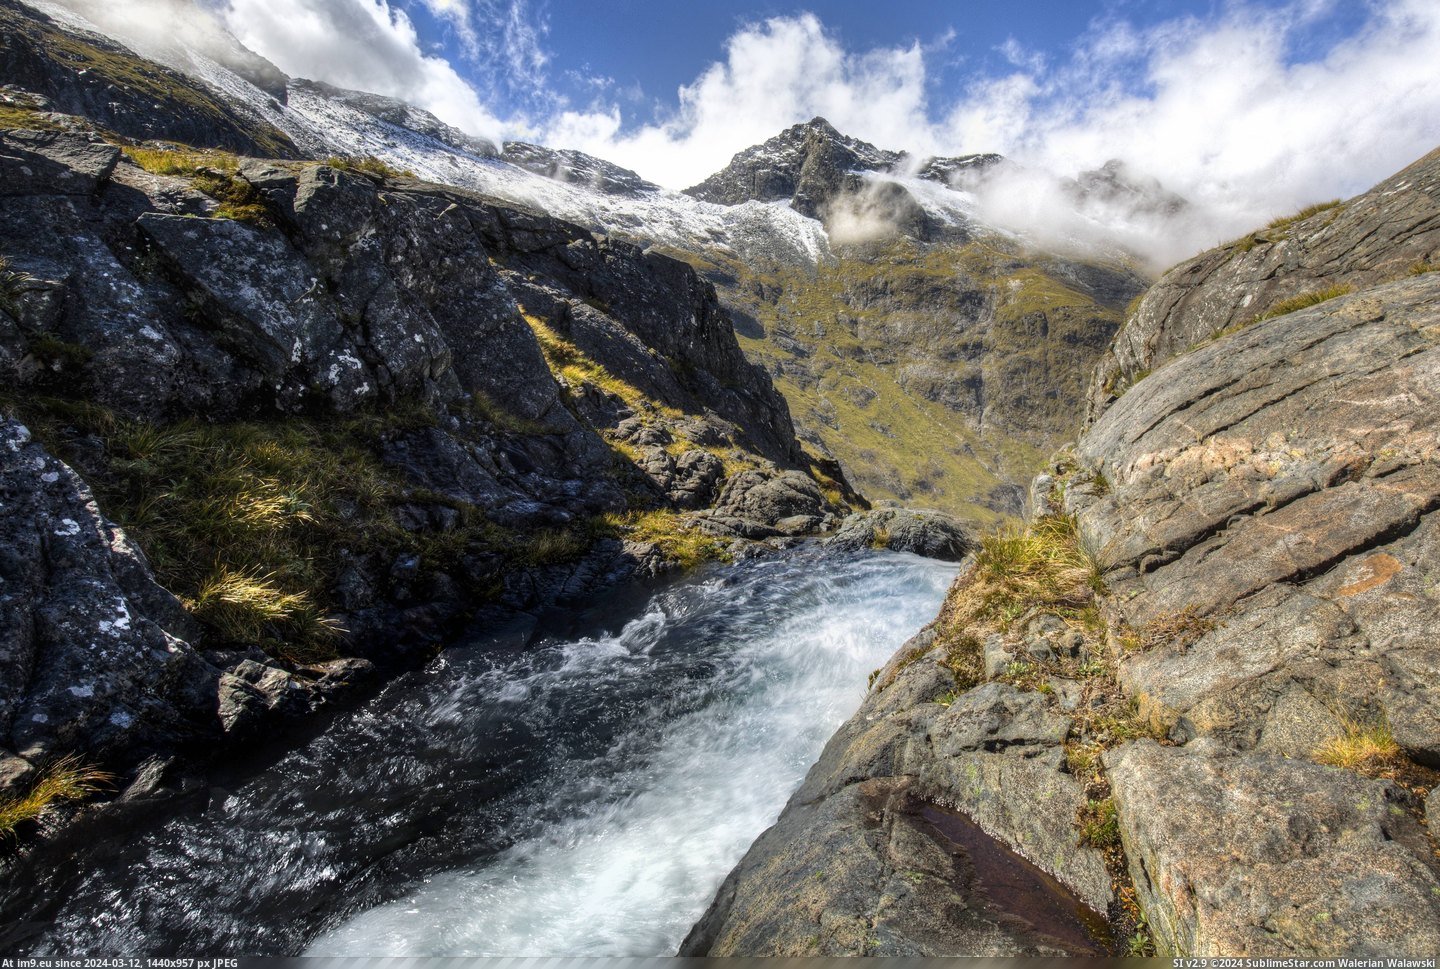 #Park #National #Fiordland #Crest #Earl #Mountains #Falls [Earthporn] At the crest of Bowmar Falls, Fiordland National Park, NZ, looking across to the Earl Mountains  [5191x3461] Pic. (Bild von album My r/EARTHPORN favs))